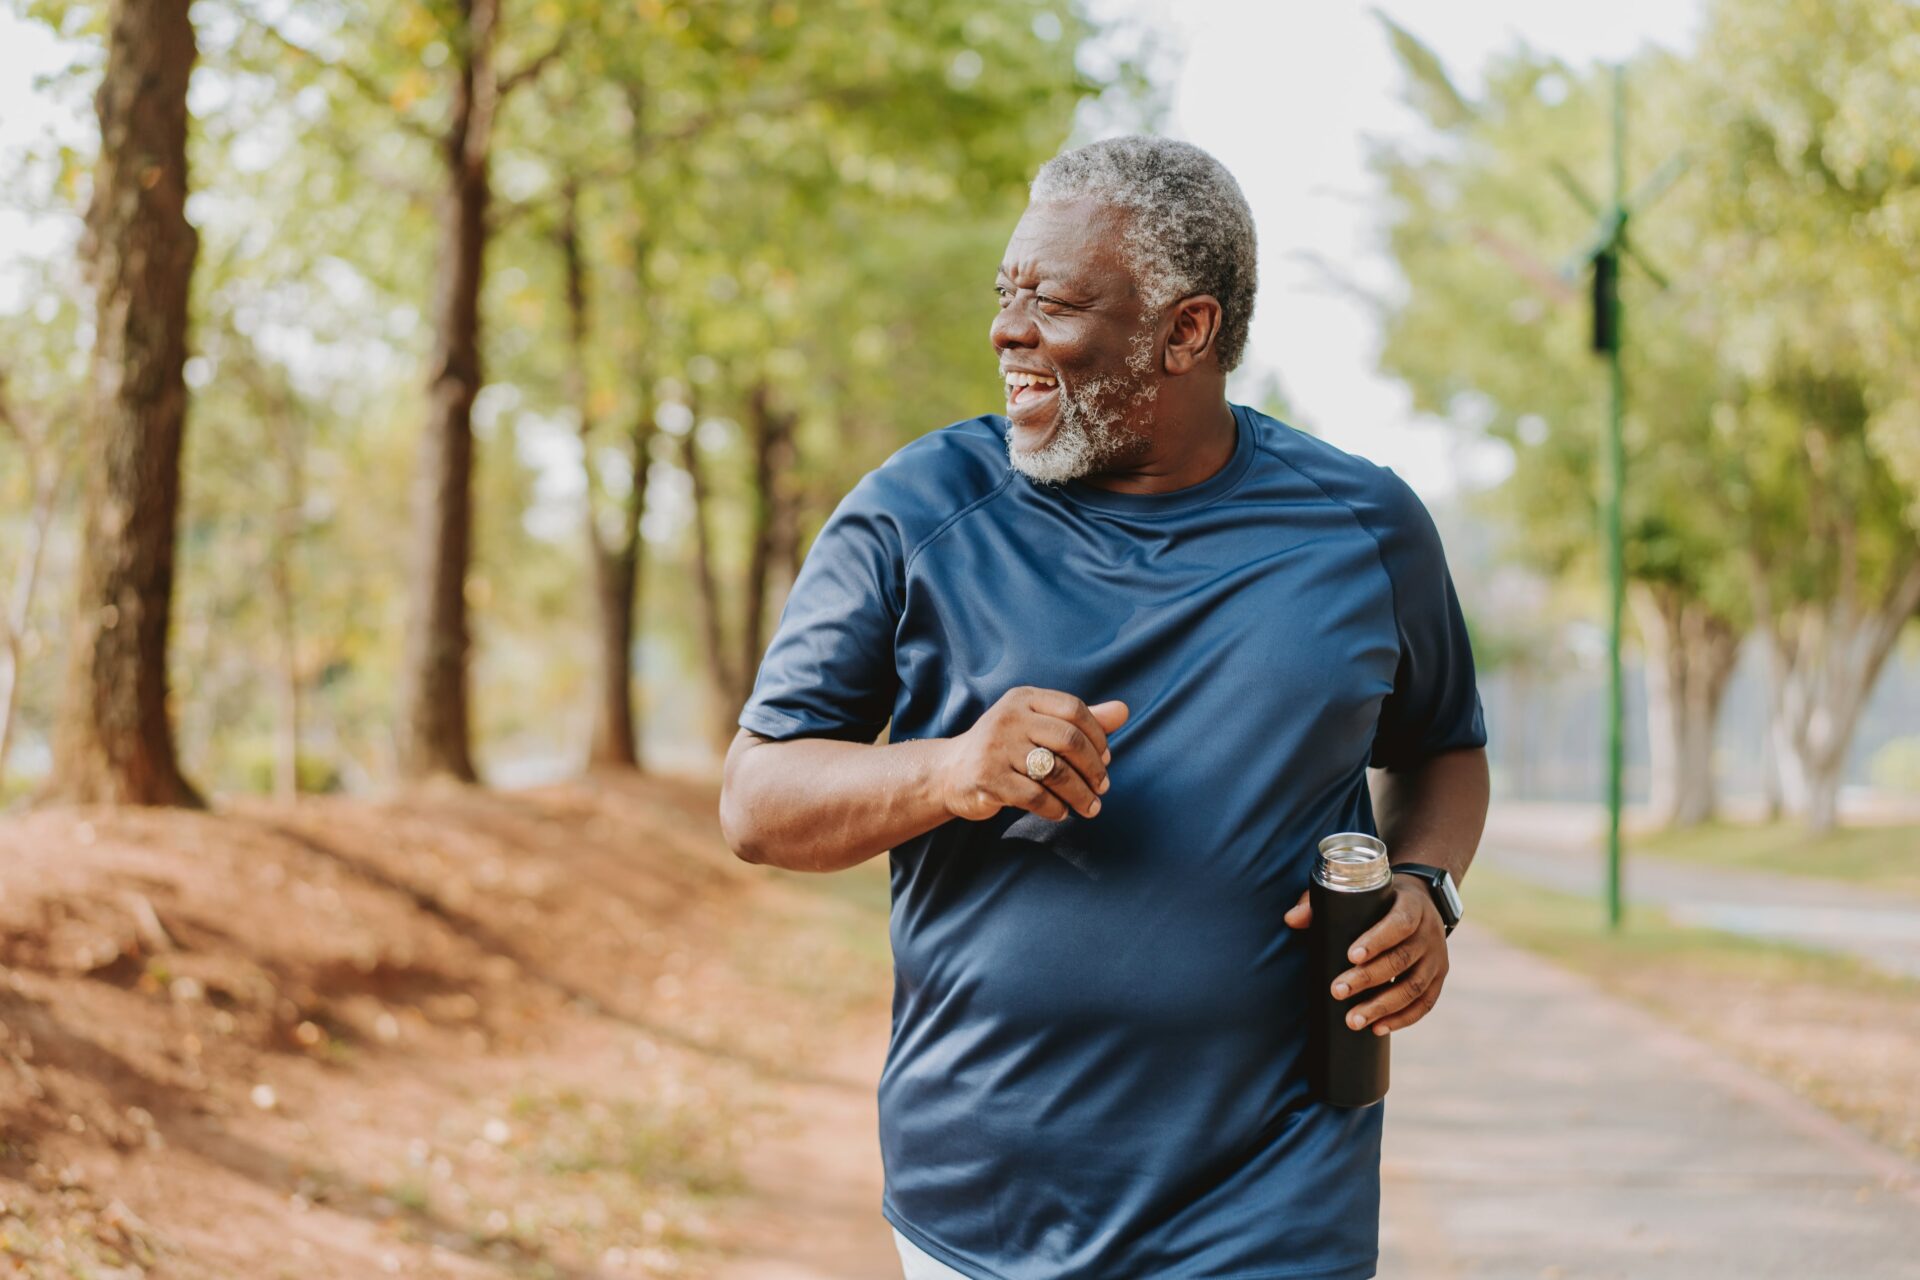 An older man smiling and going for a jog with water outside on a sunny day.